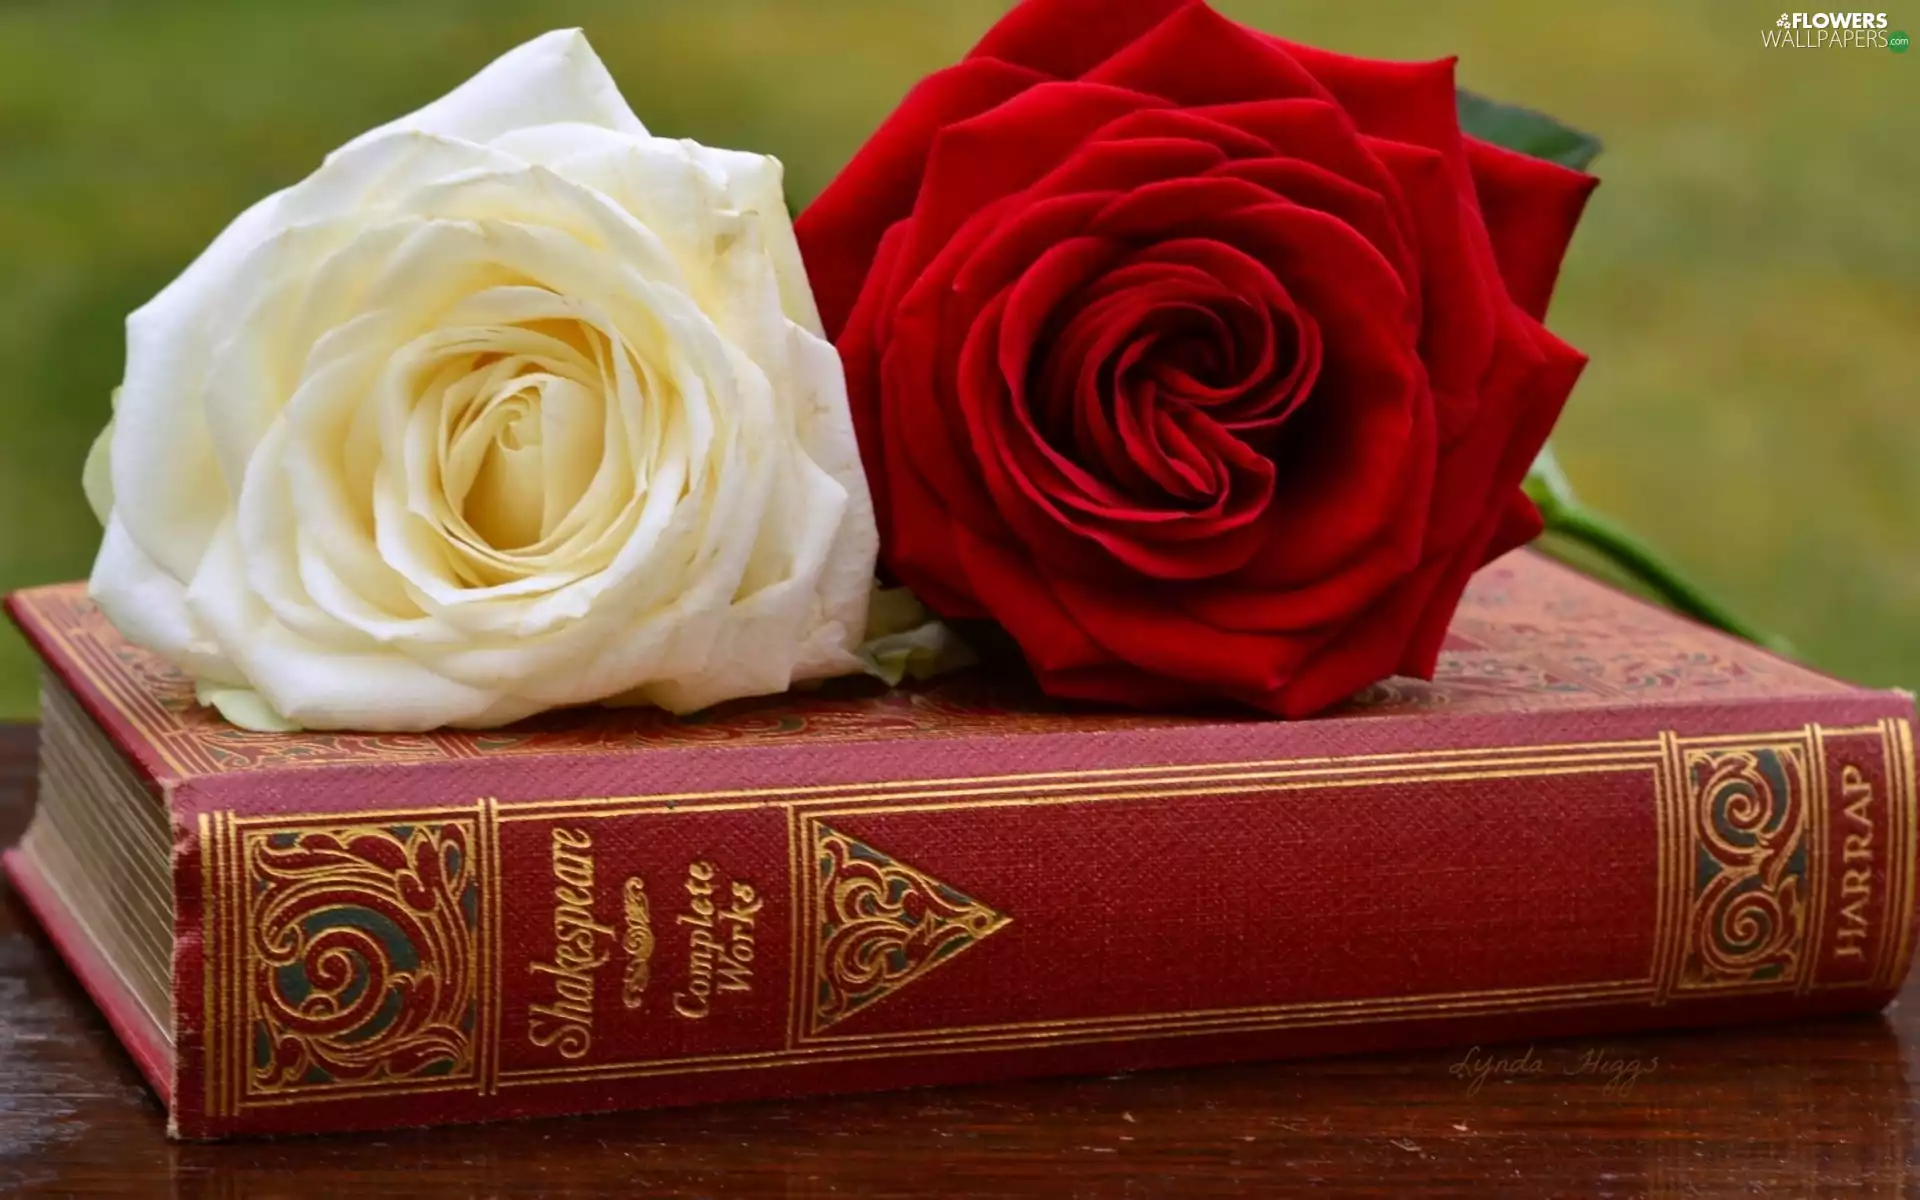 Book, composition, red hot, rose, White